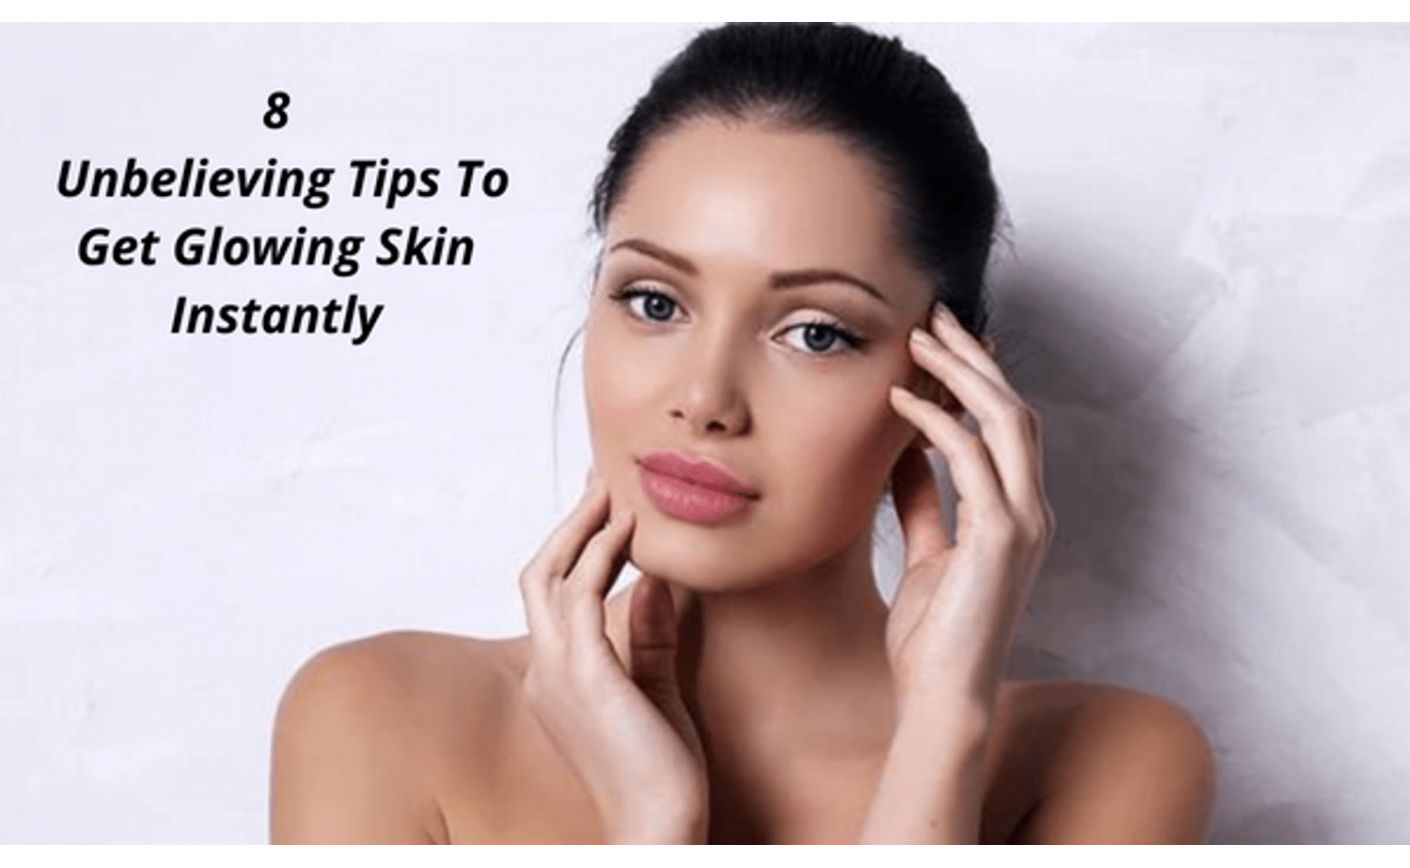 8 Unbelieving Tips To Get Glowing Skin Instantly